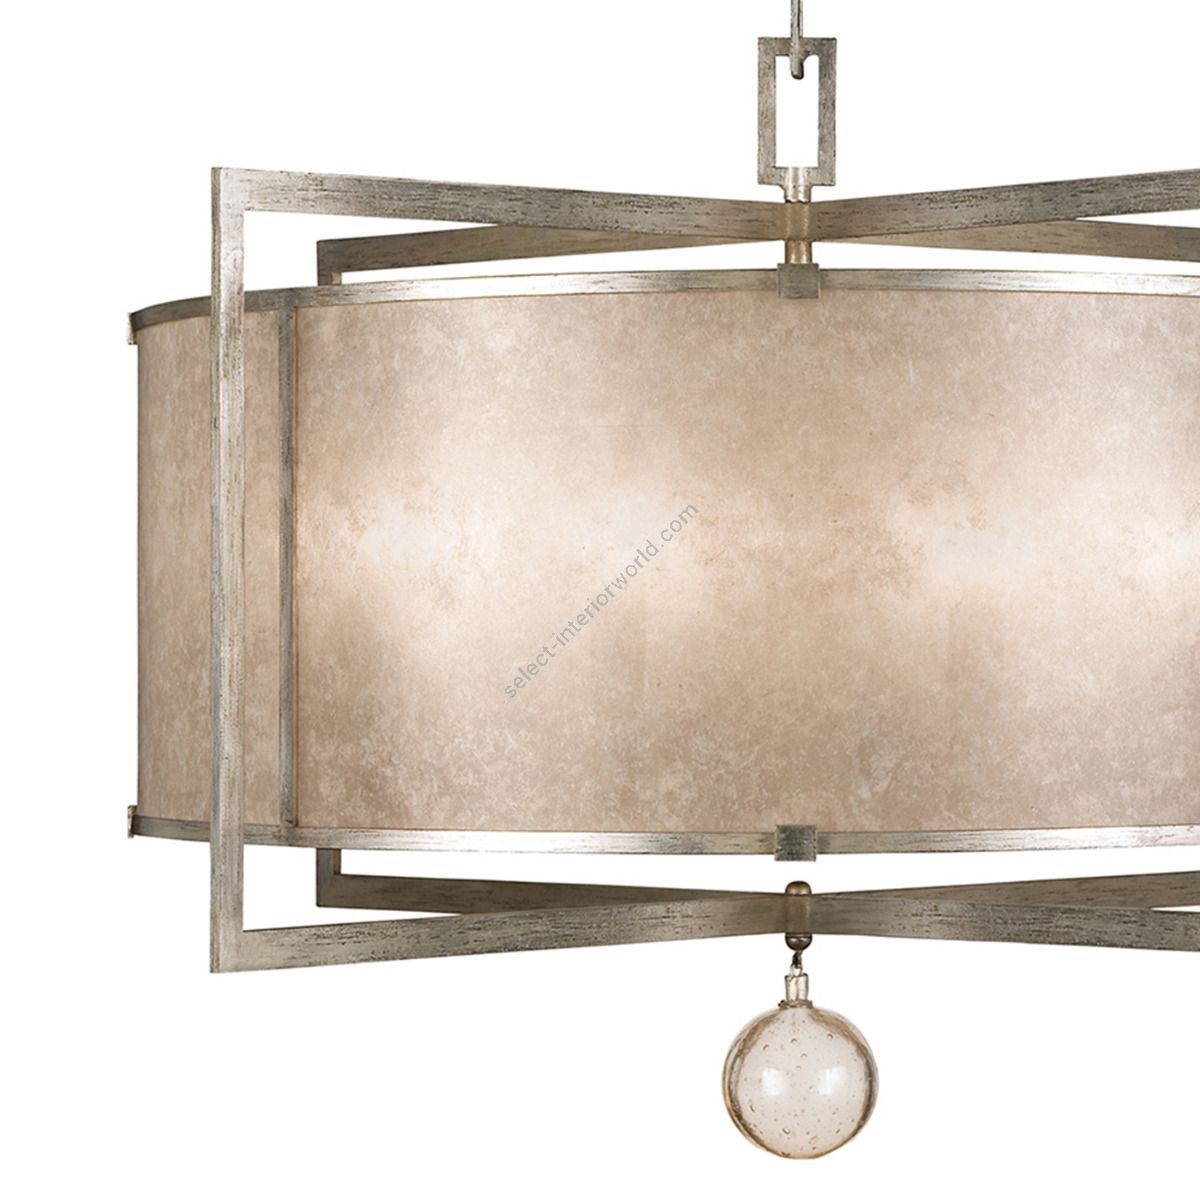 Singapore Moderne 40″ Round Pendant 591540 by Fine Art Handcrafted Lighting